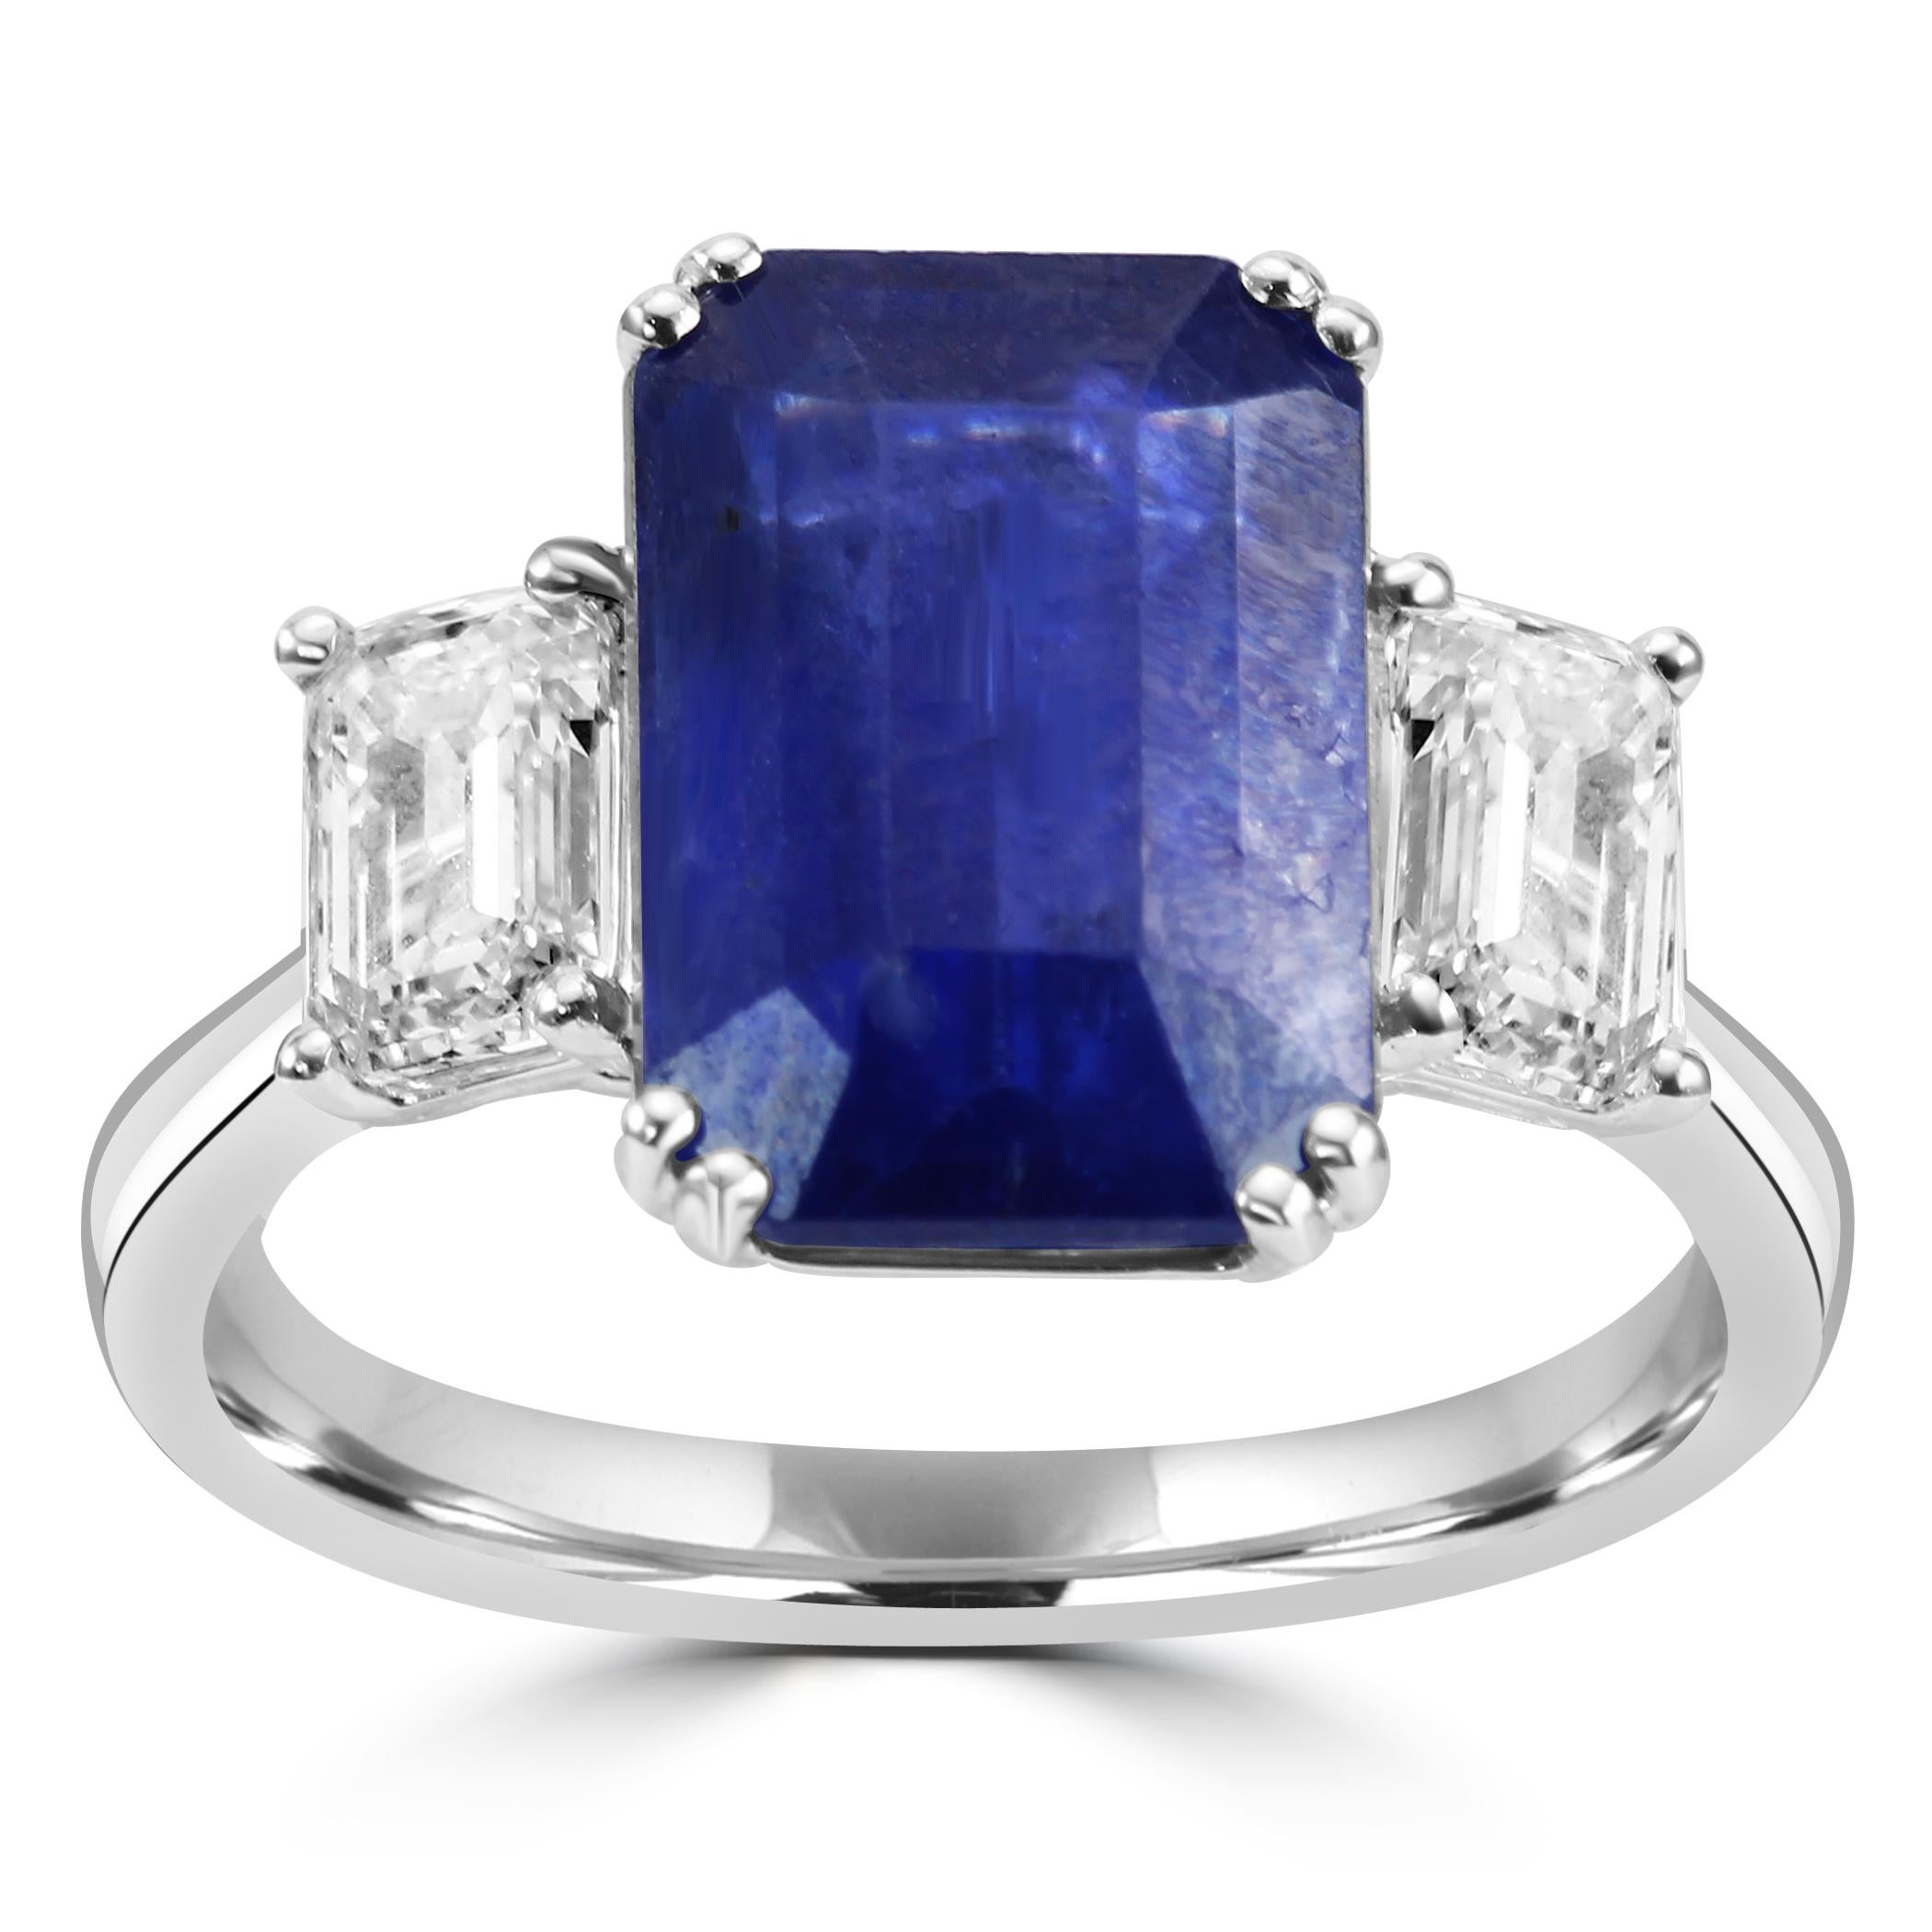 Behold our breathtaking Three-Stone Bridal Ring, a true symbol of everlasting love and sophistication.

At the heart of this exquisite ring is a stunning Ceylon Sapphire, featuring an elegant Emerald cut and weighing an impressive 6.62 carats. The